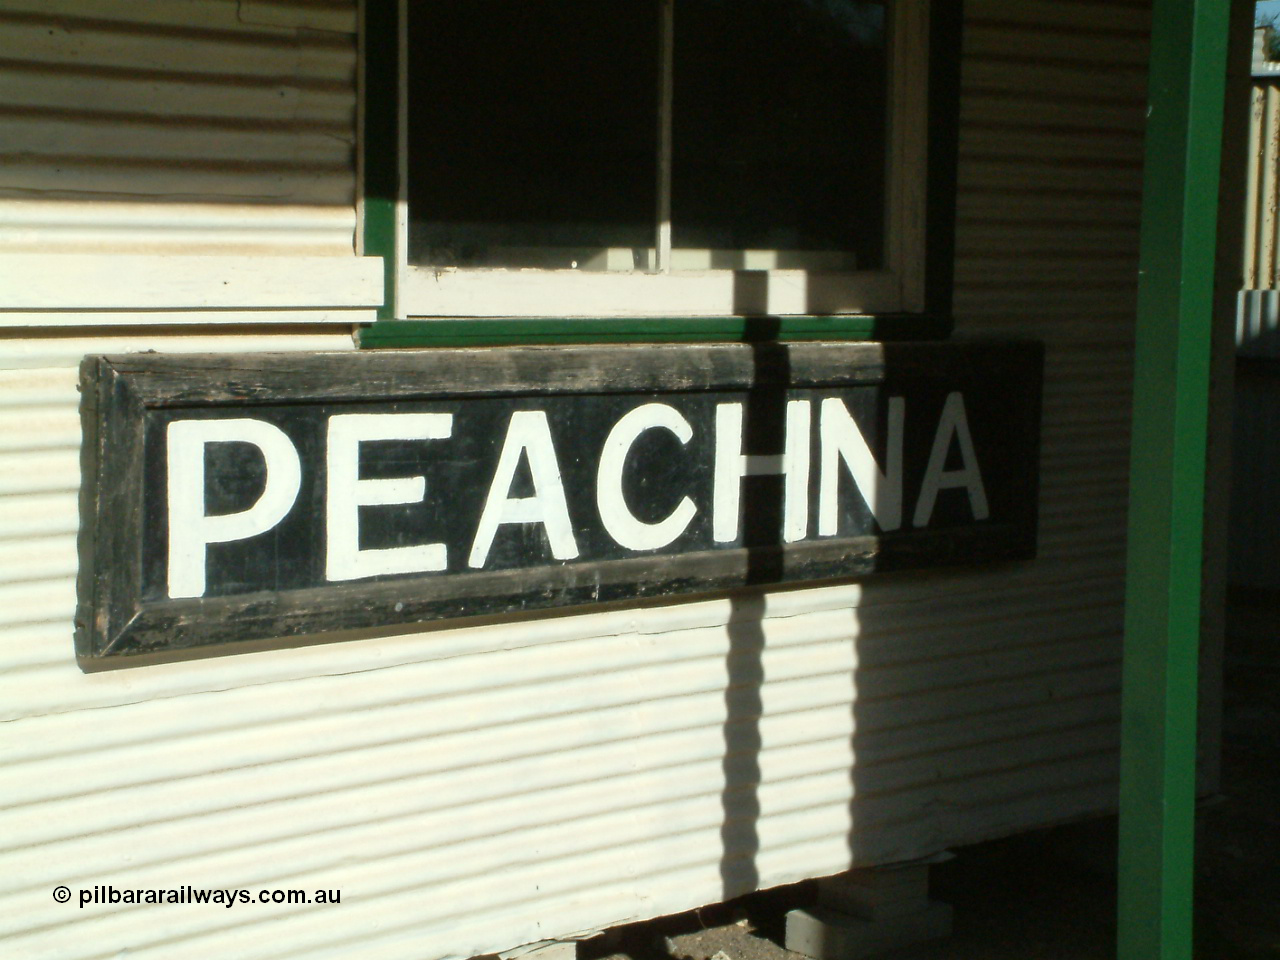 030405 160936
Lock and District Historical Museum, original Peachna railway station sign. 5th April 2003.
